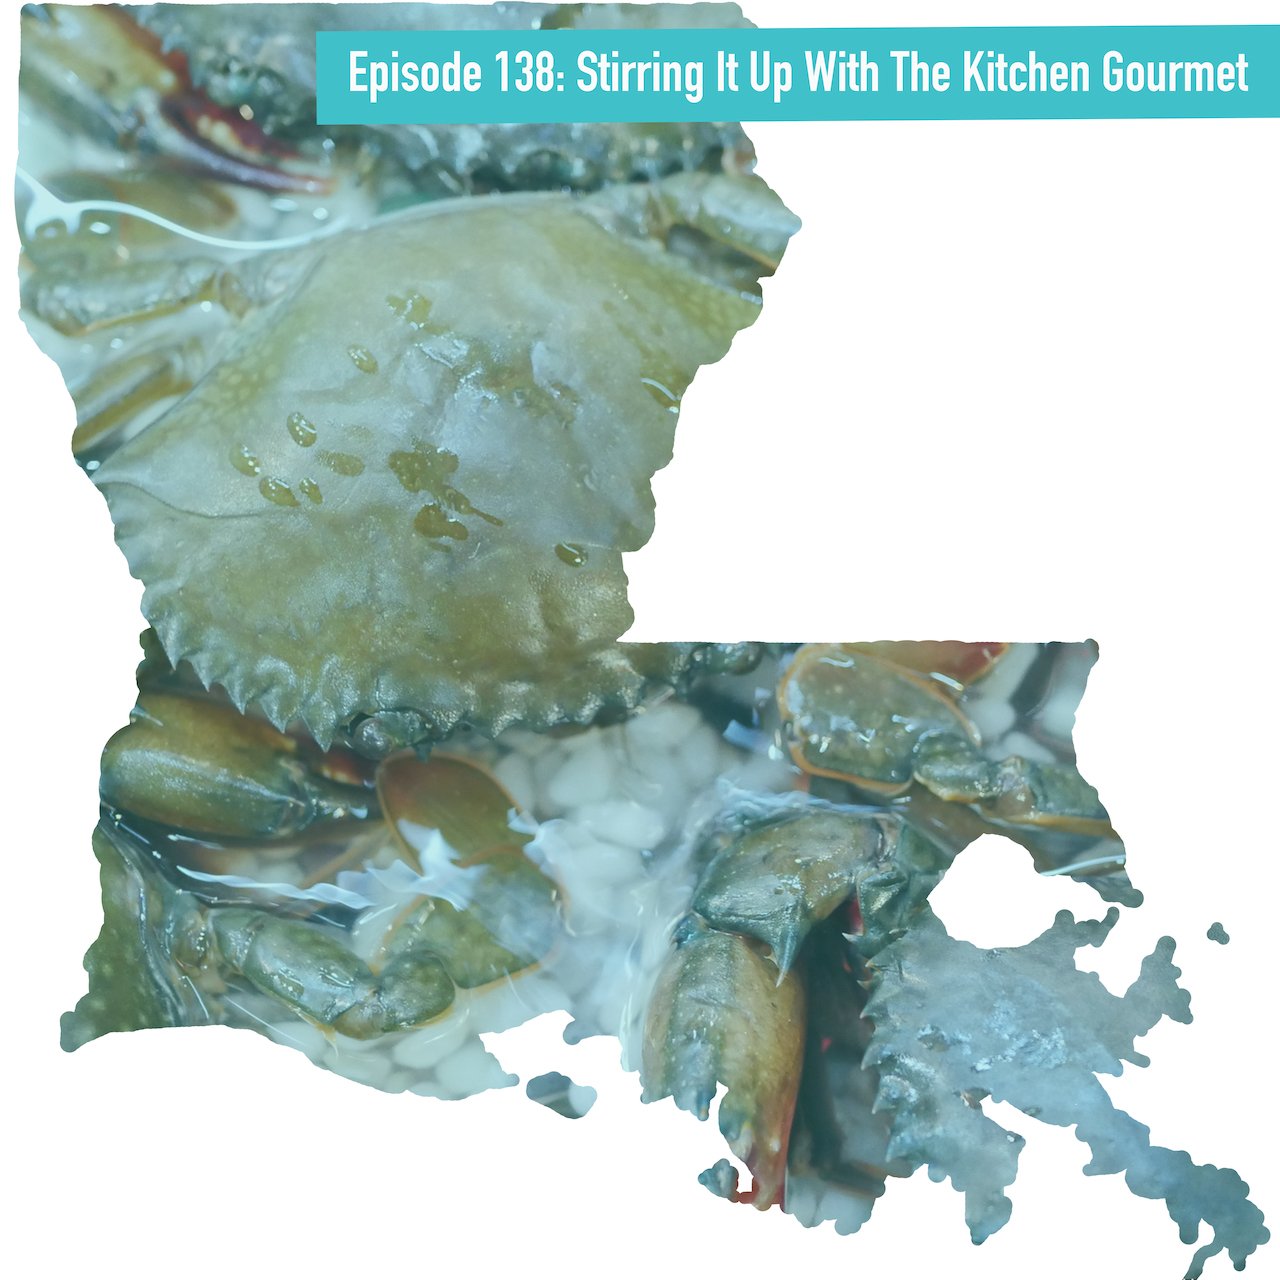 The Essential Louisiana Seafood Cookbook - New Orleans Magazine